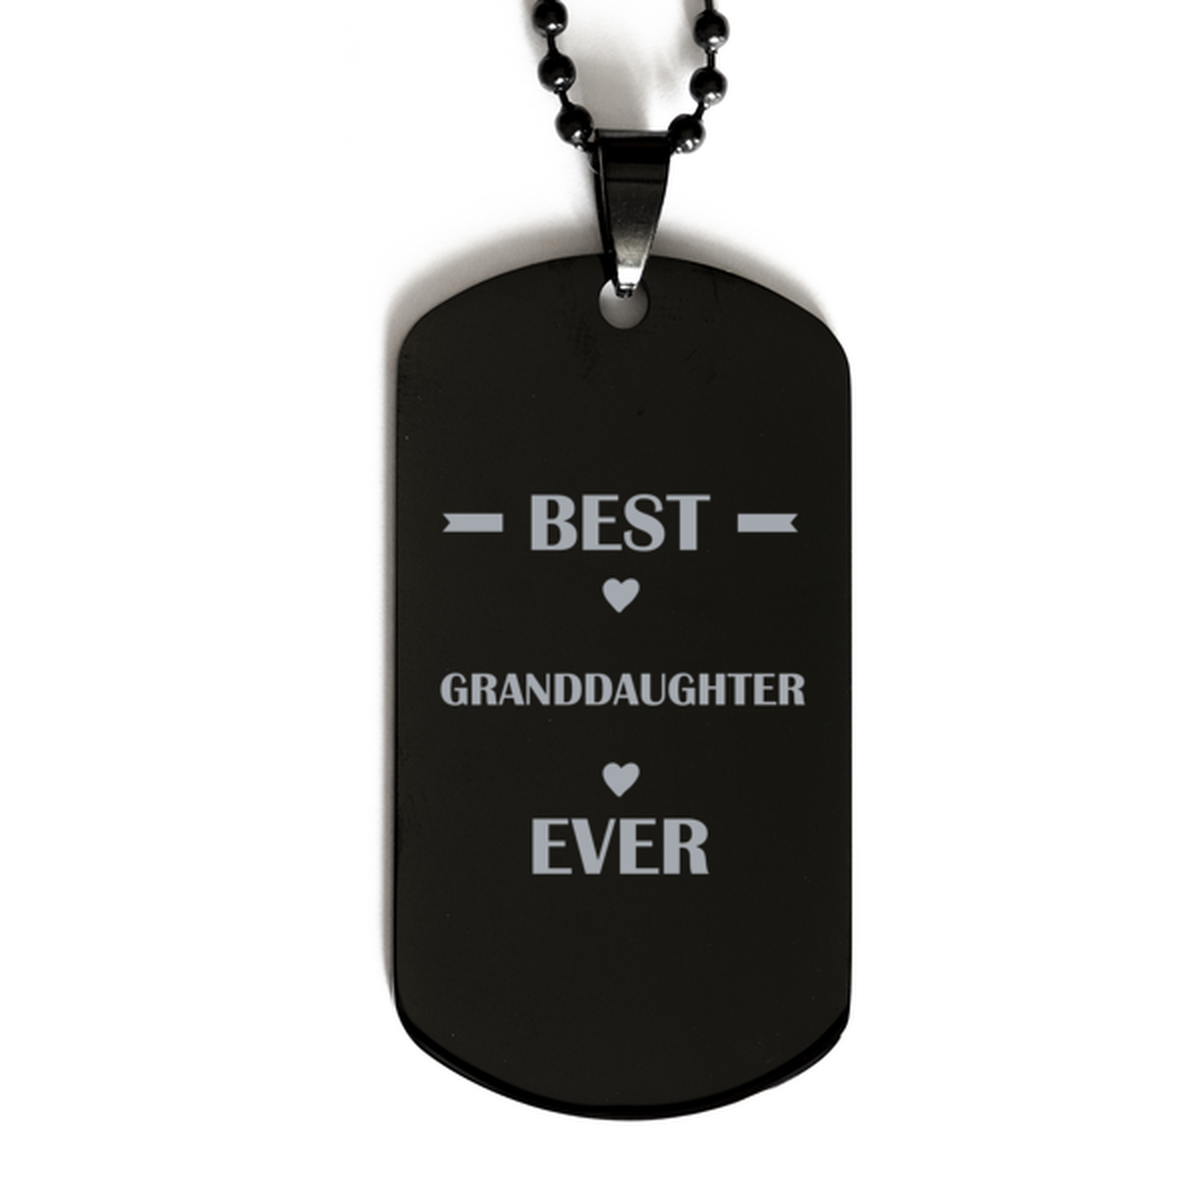 Best Granddaughter Ever Granddaughter Gifts, Funny Black Dog Tag For Granddaughter, Birthday Family Presents Engraved Necklace For Women